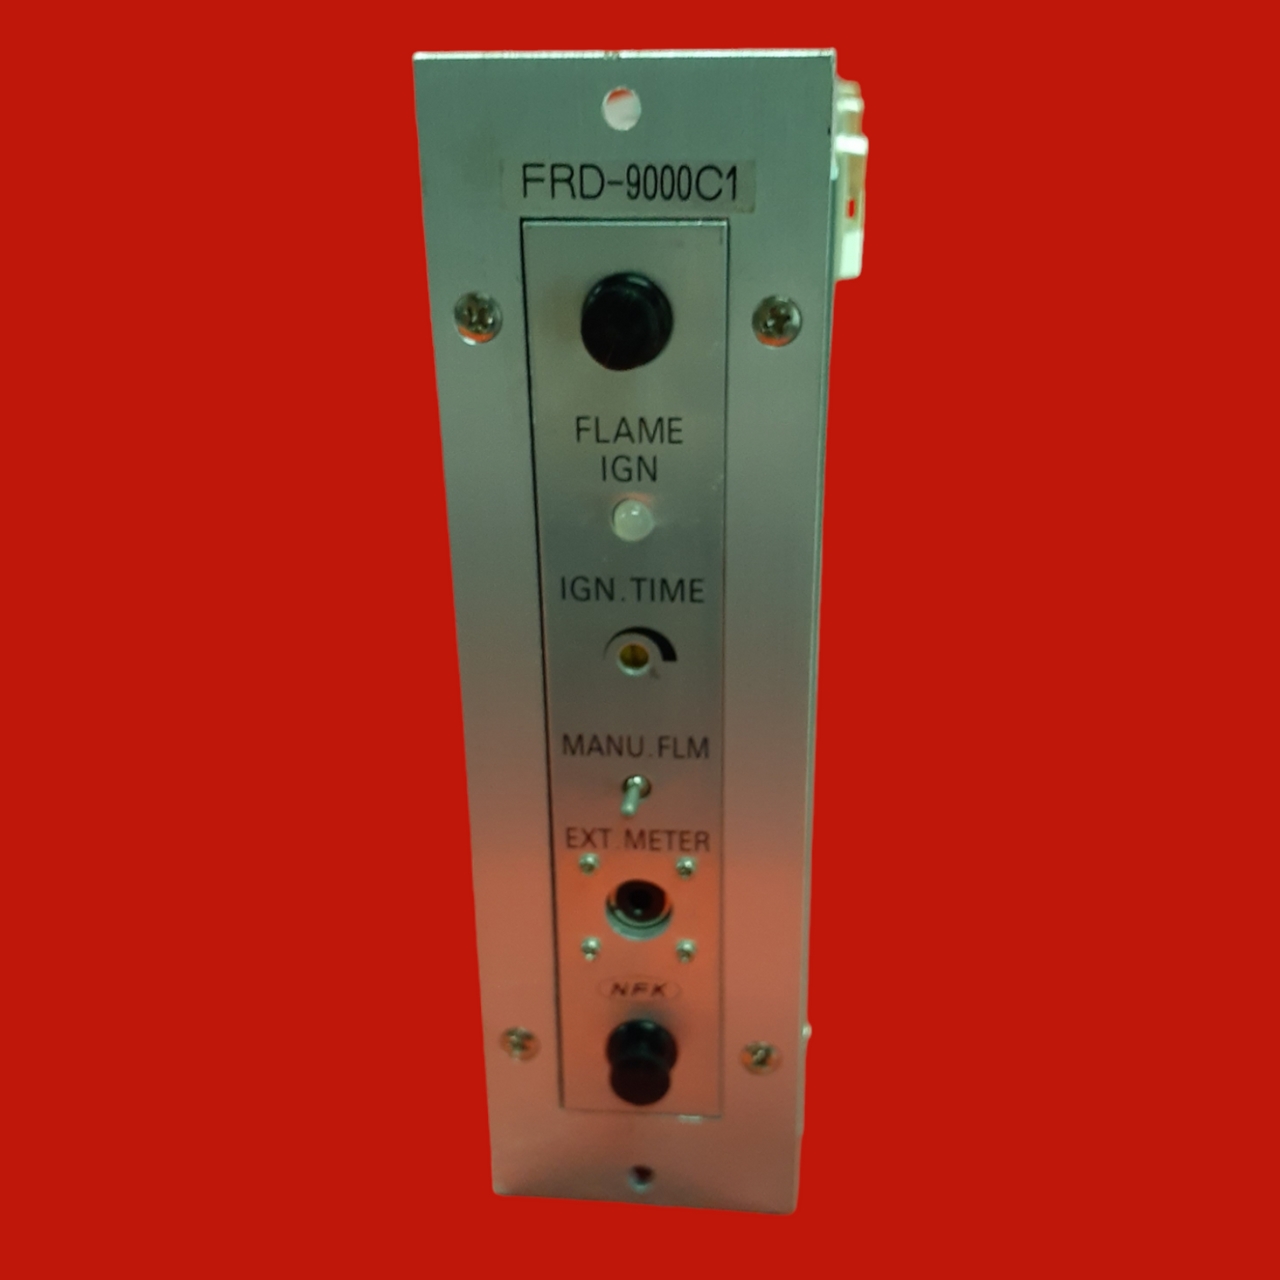 NFK Flame Detector, FRD-9000C1-FOR PARTS ONLY